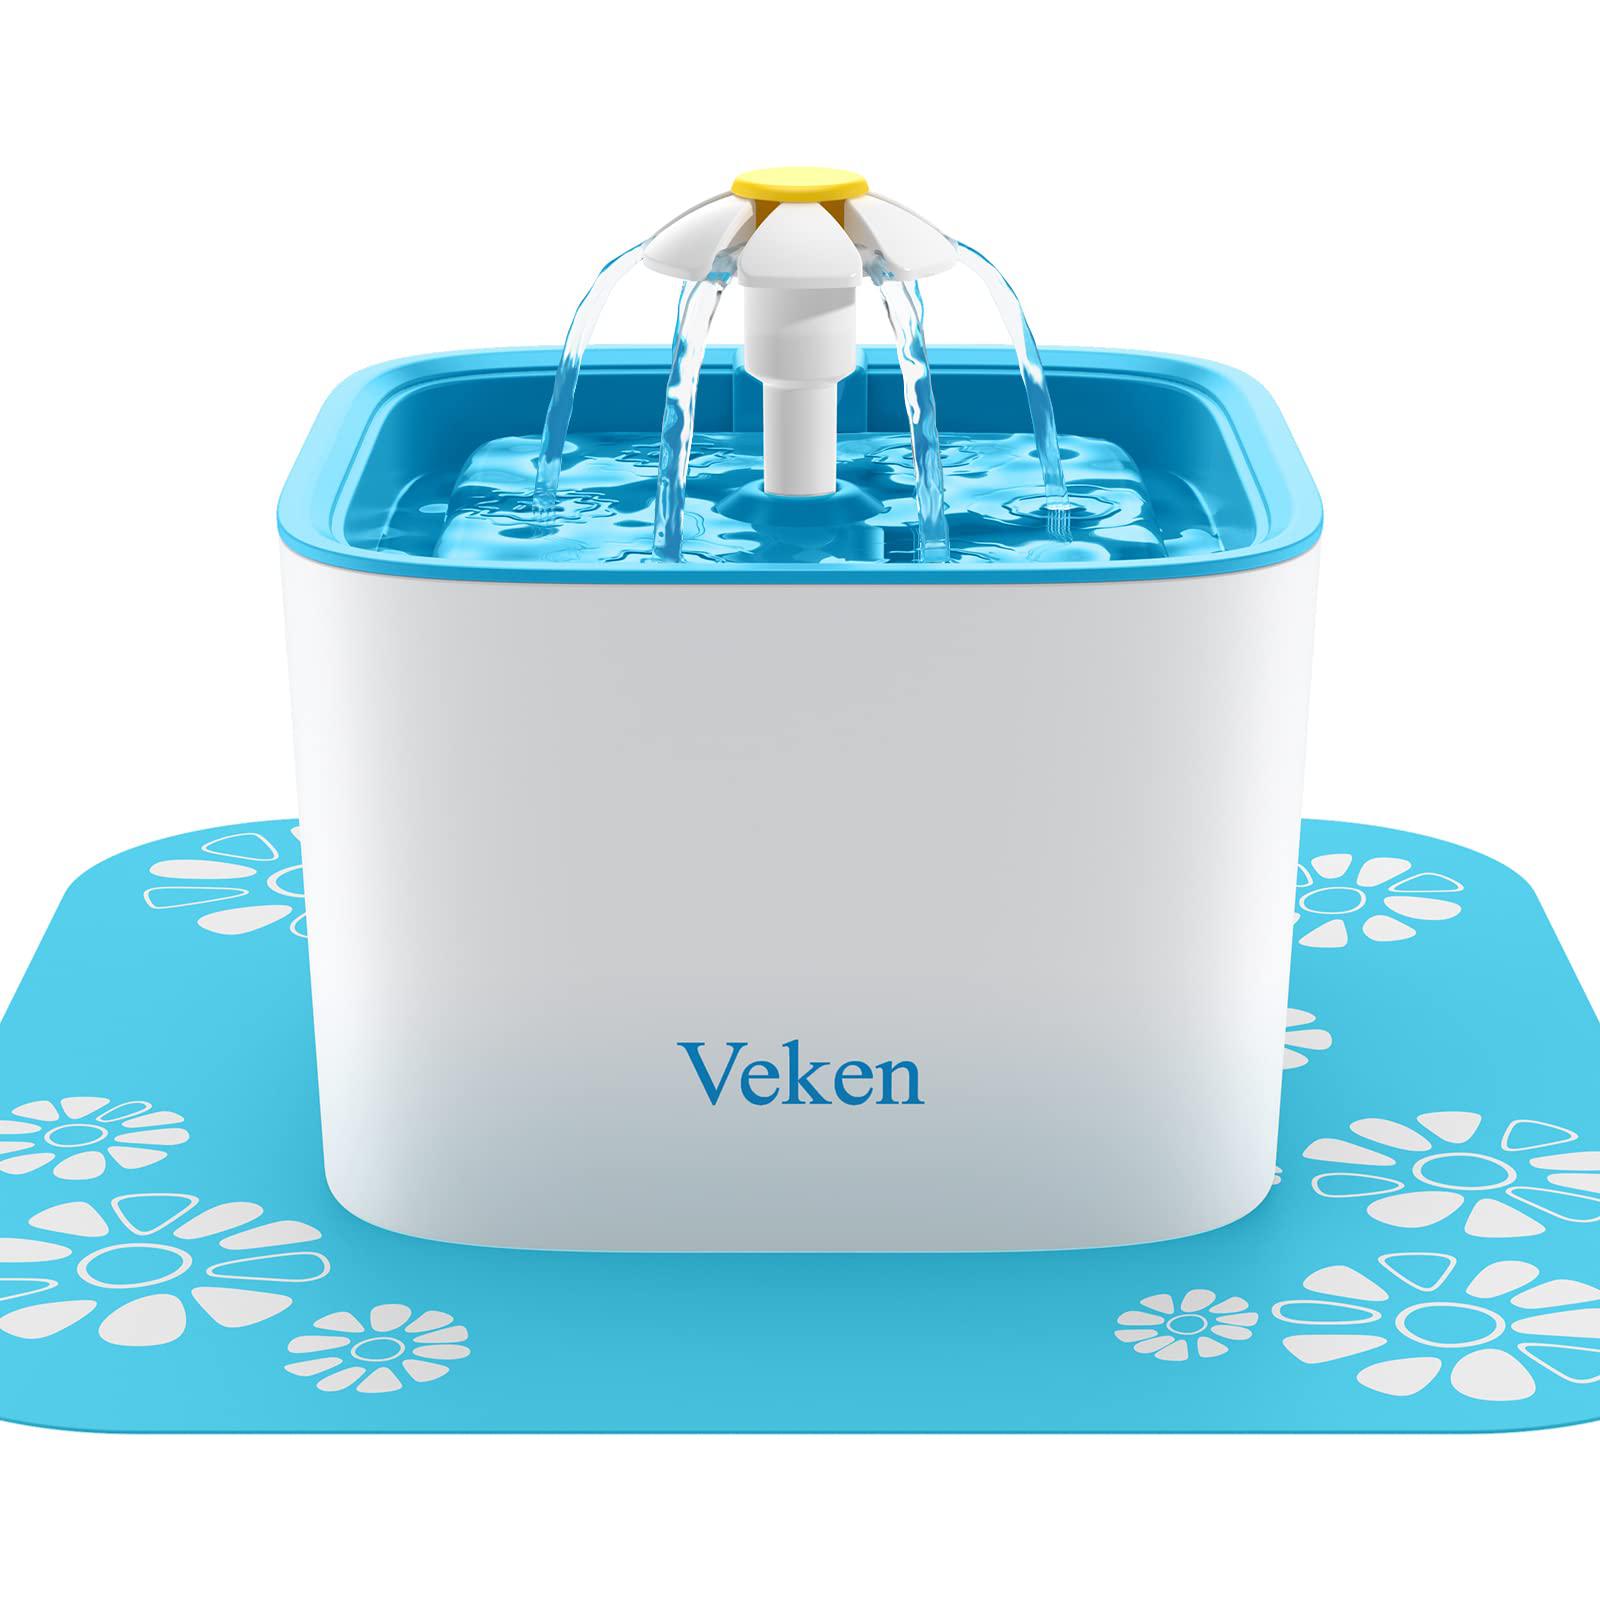 Veken veken pet fountain, 84oz/2.5l automatic cat water fountain dog water  dispenser with 3 replacement filters & 1 silicone mat fo